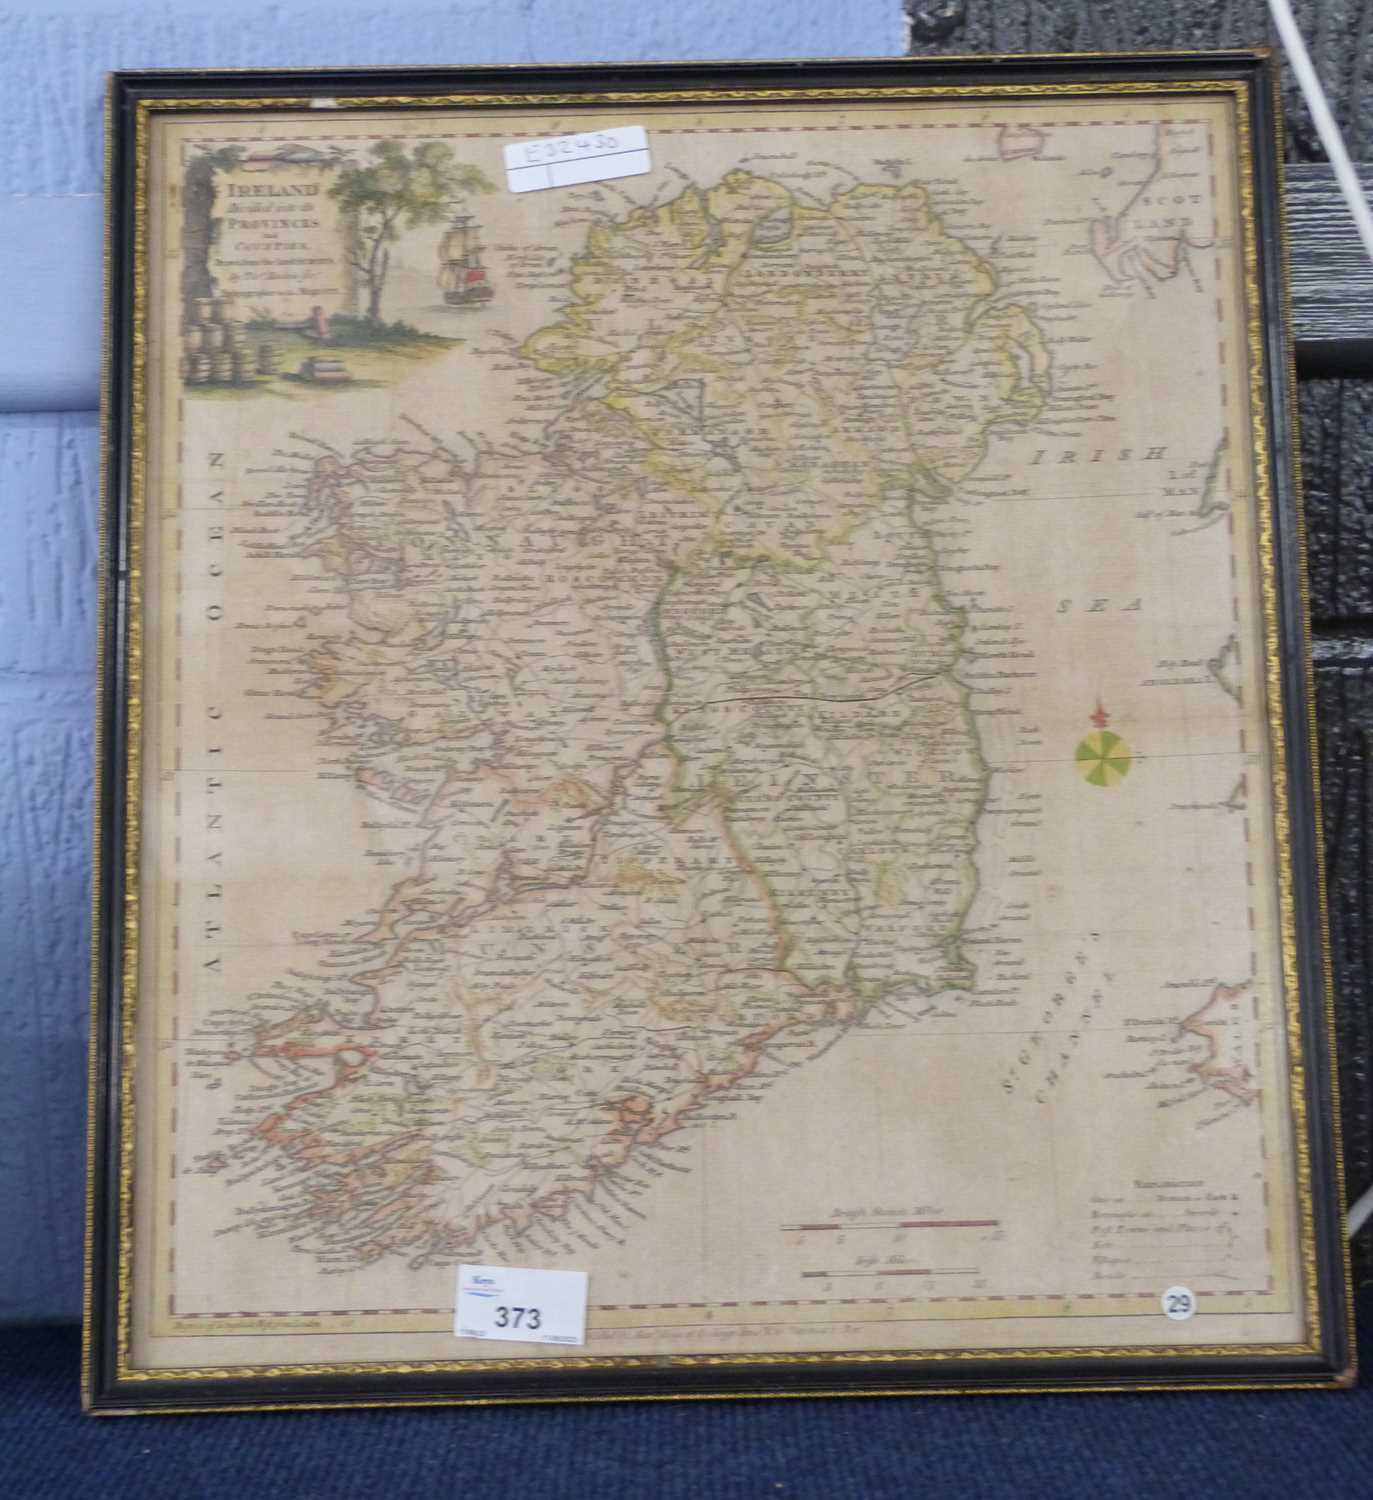 A framed map of Ireland divided into Provinces by Thomas Kitchin, published by Alexander Hogg at